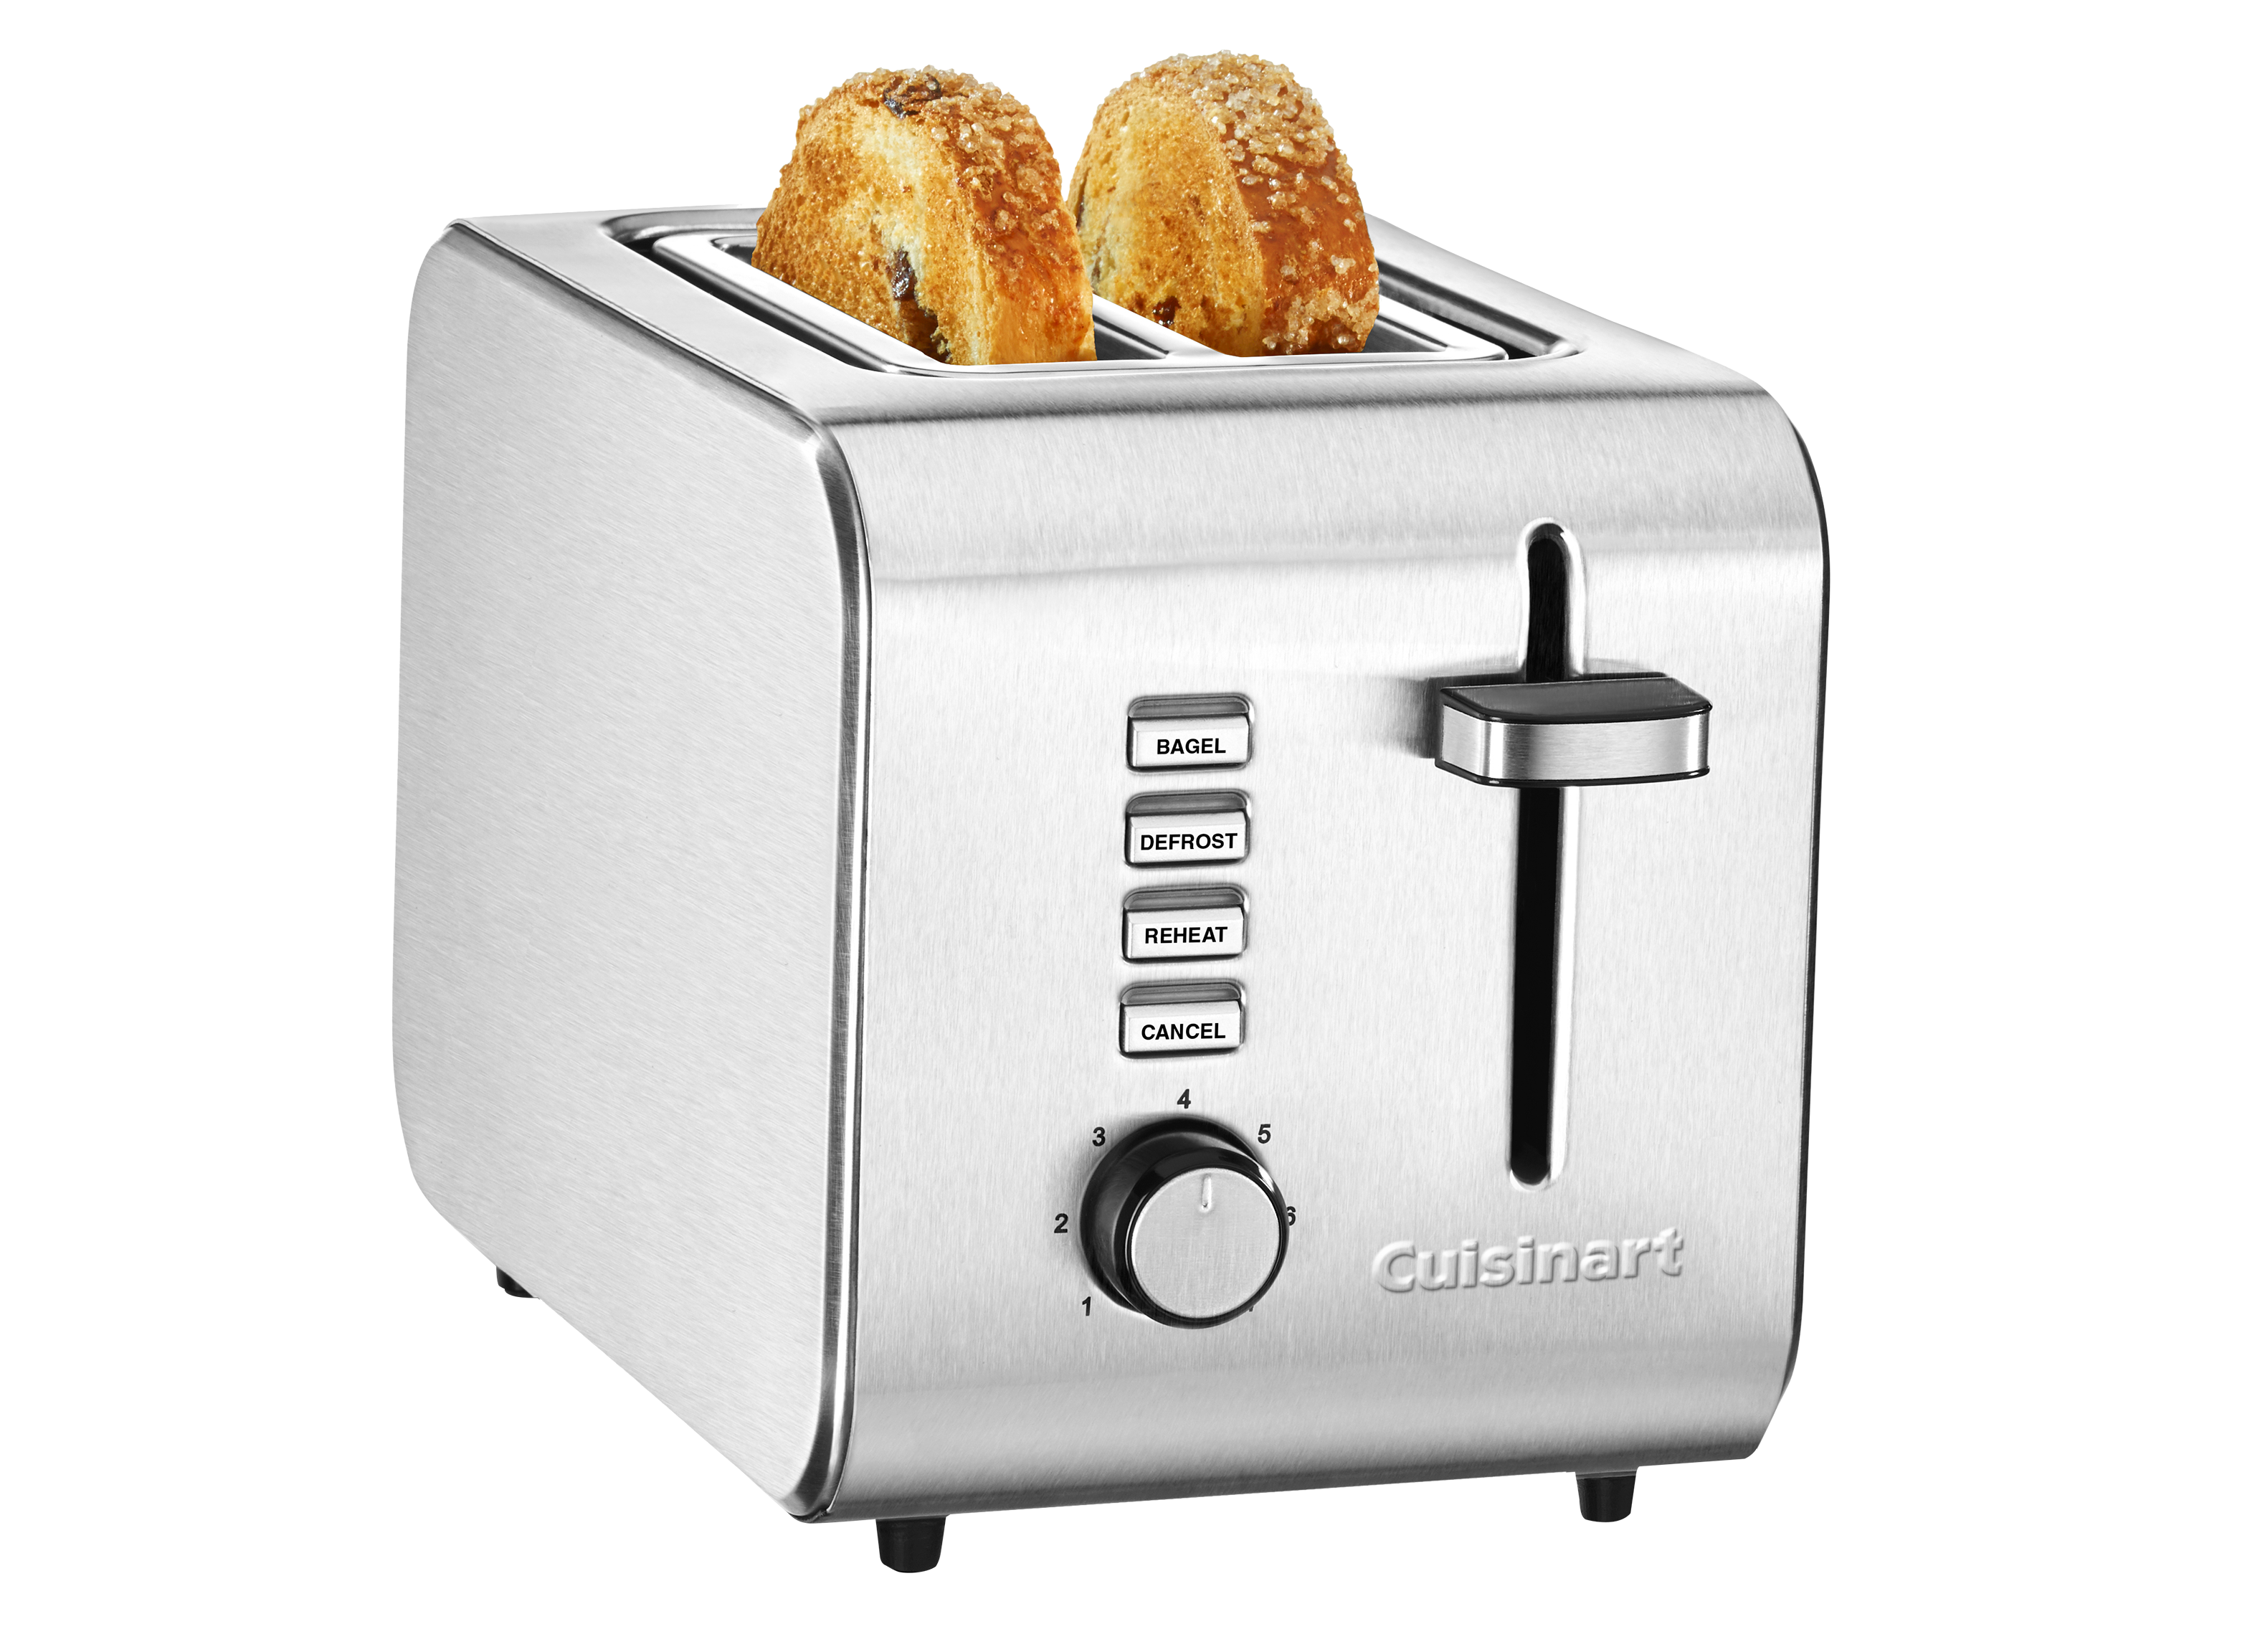 https://crdms.images.consumerreports.org/prod/products/cr/models/399803-2-slice-toasters-cuisinart-cpt-5-10009000.png